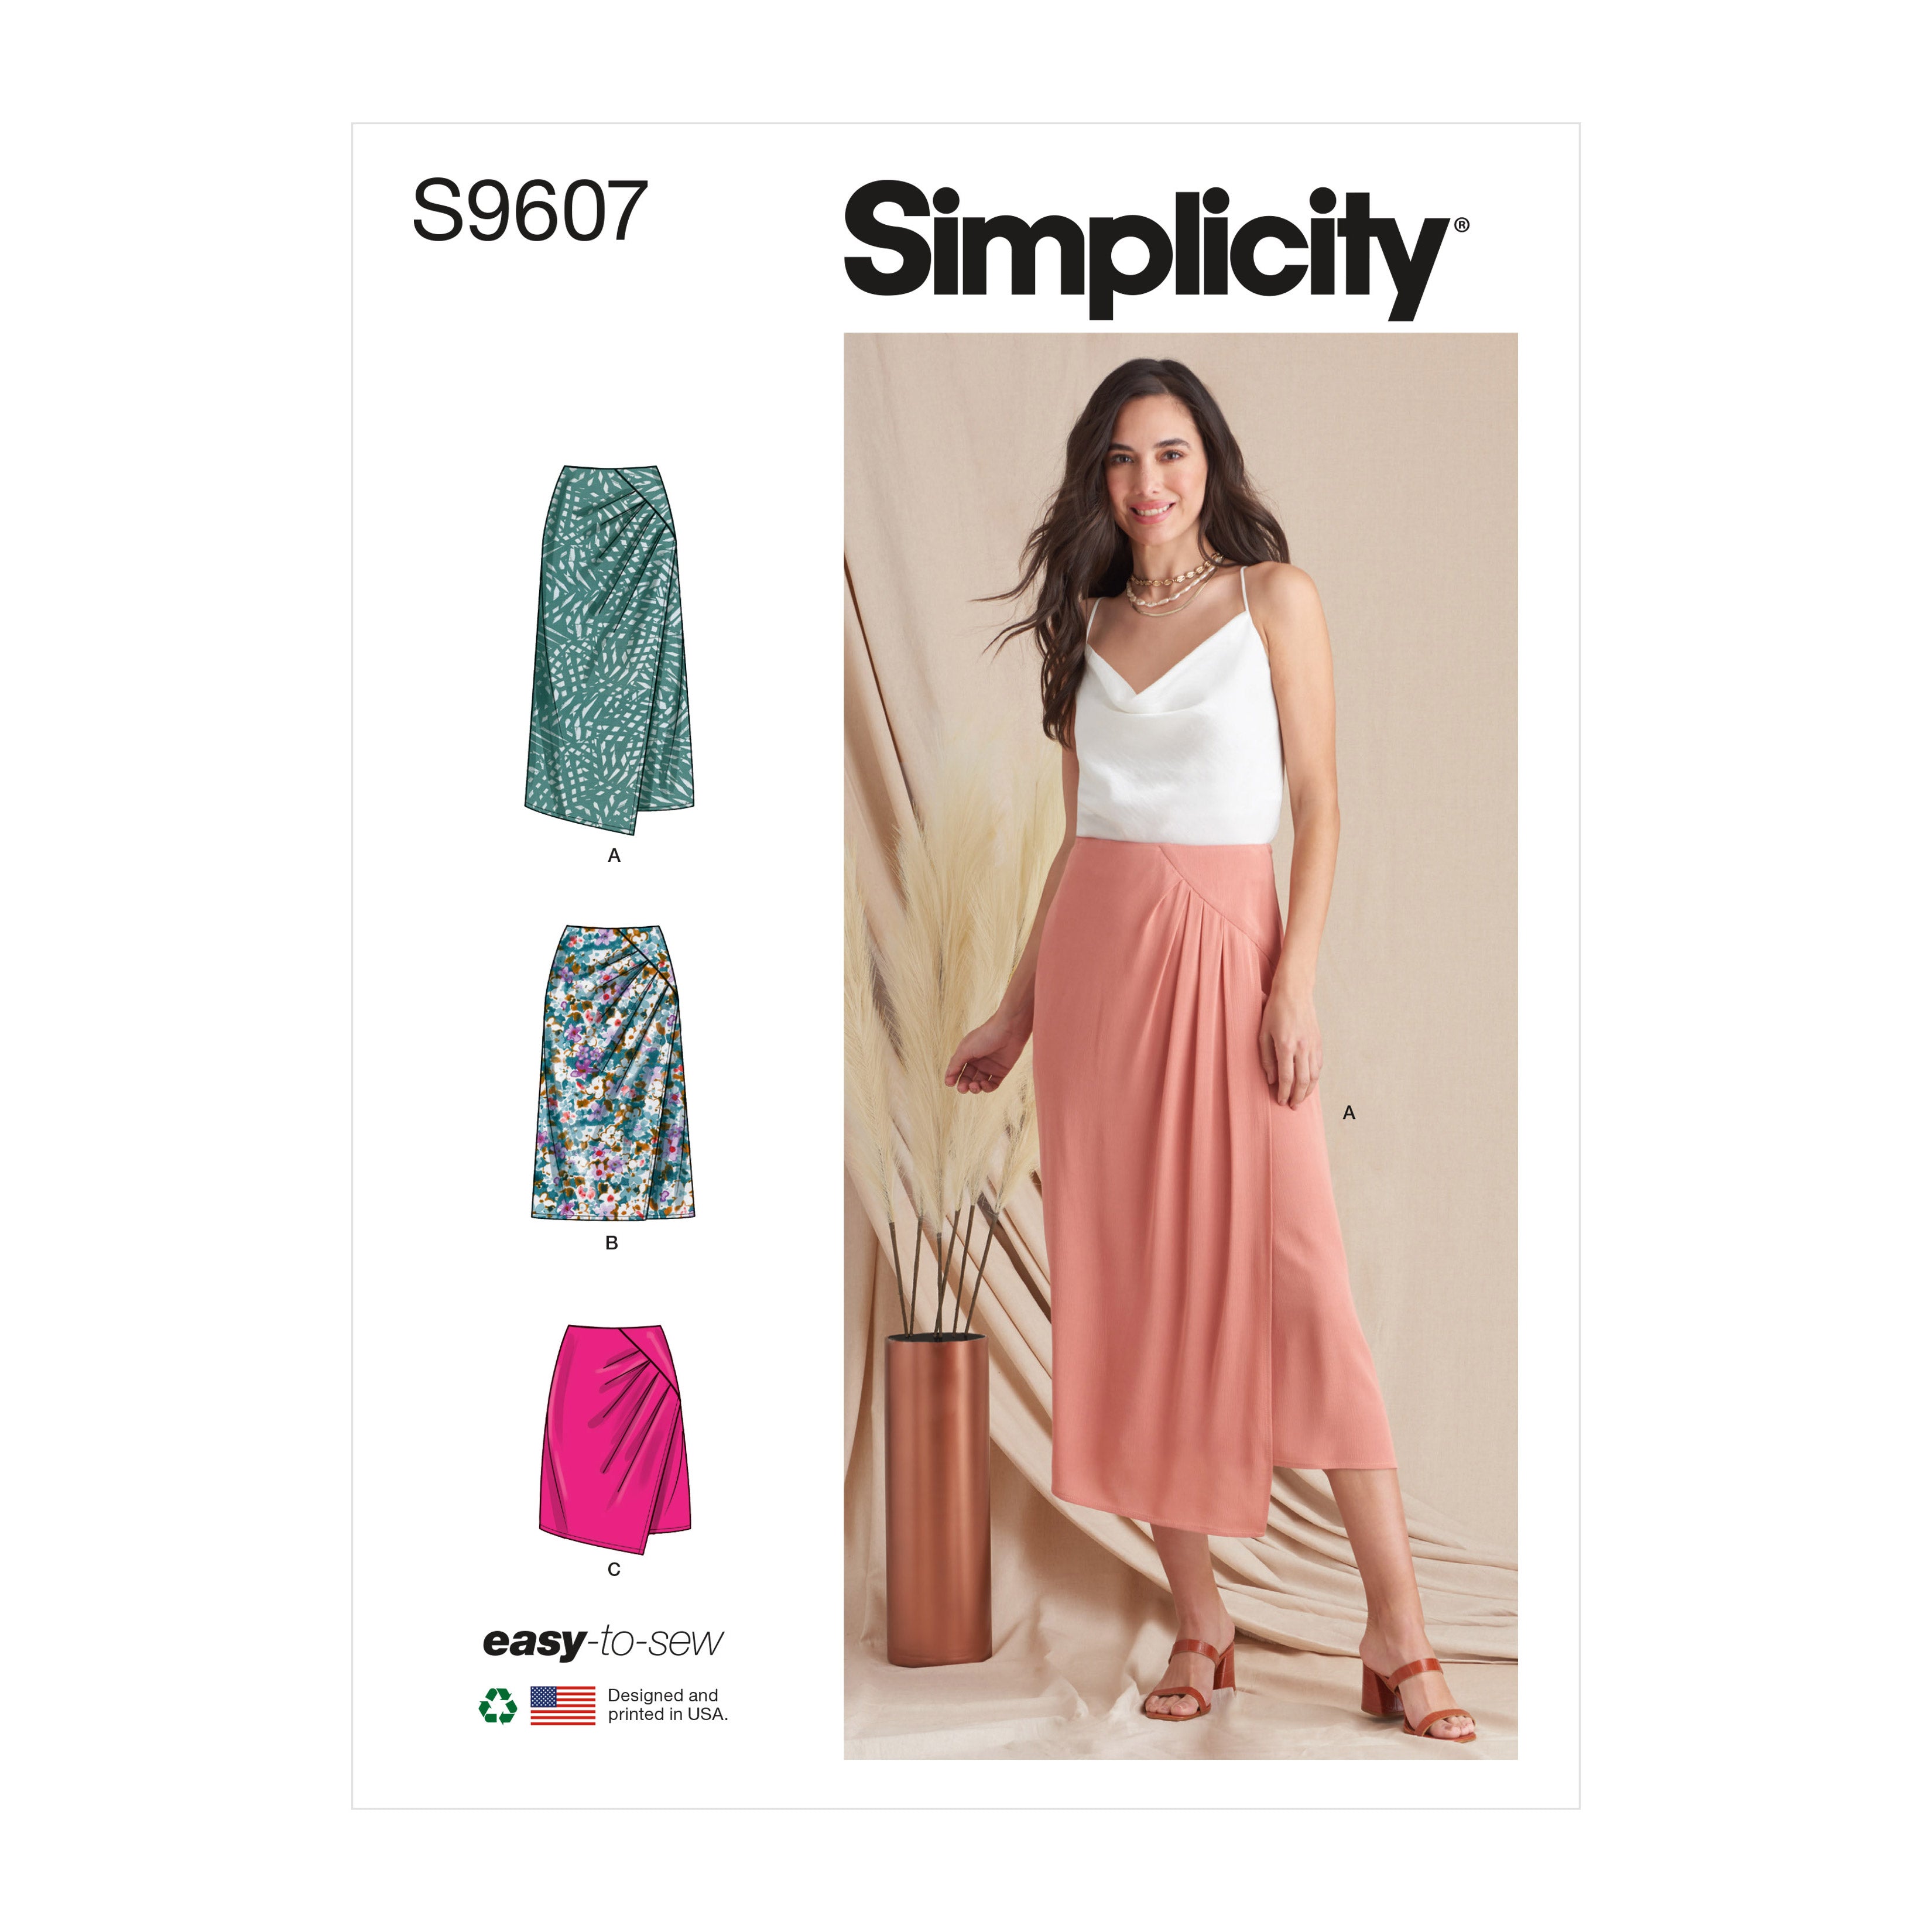 Simplicity Sewing Pattern 9607 Misses' Skirt from Jaycotts Sewing Supplies